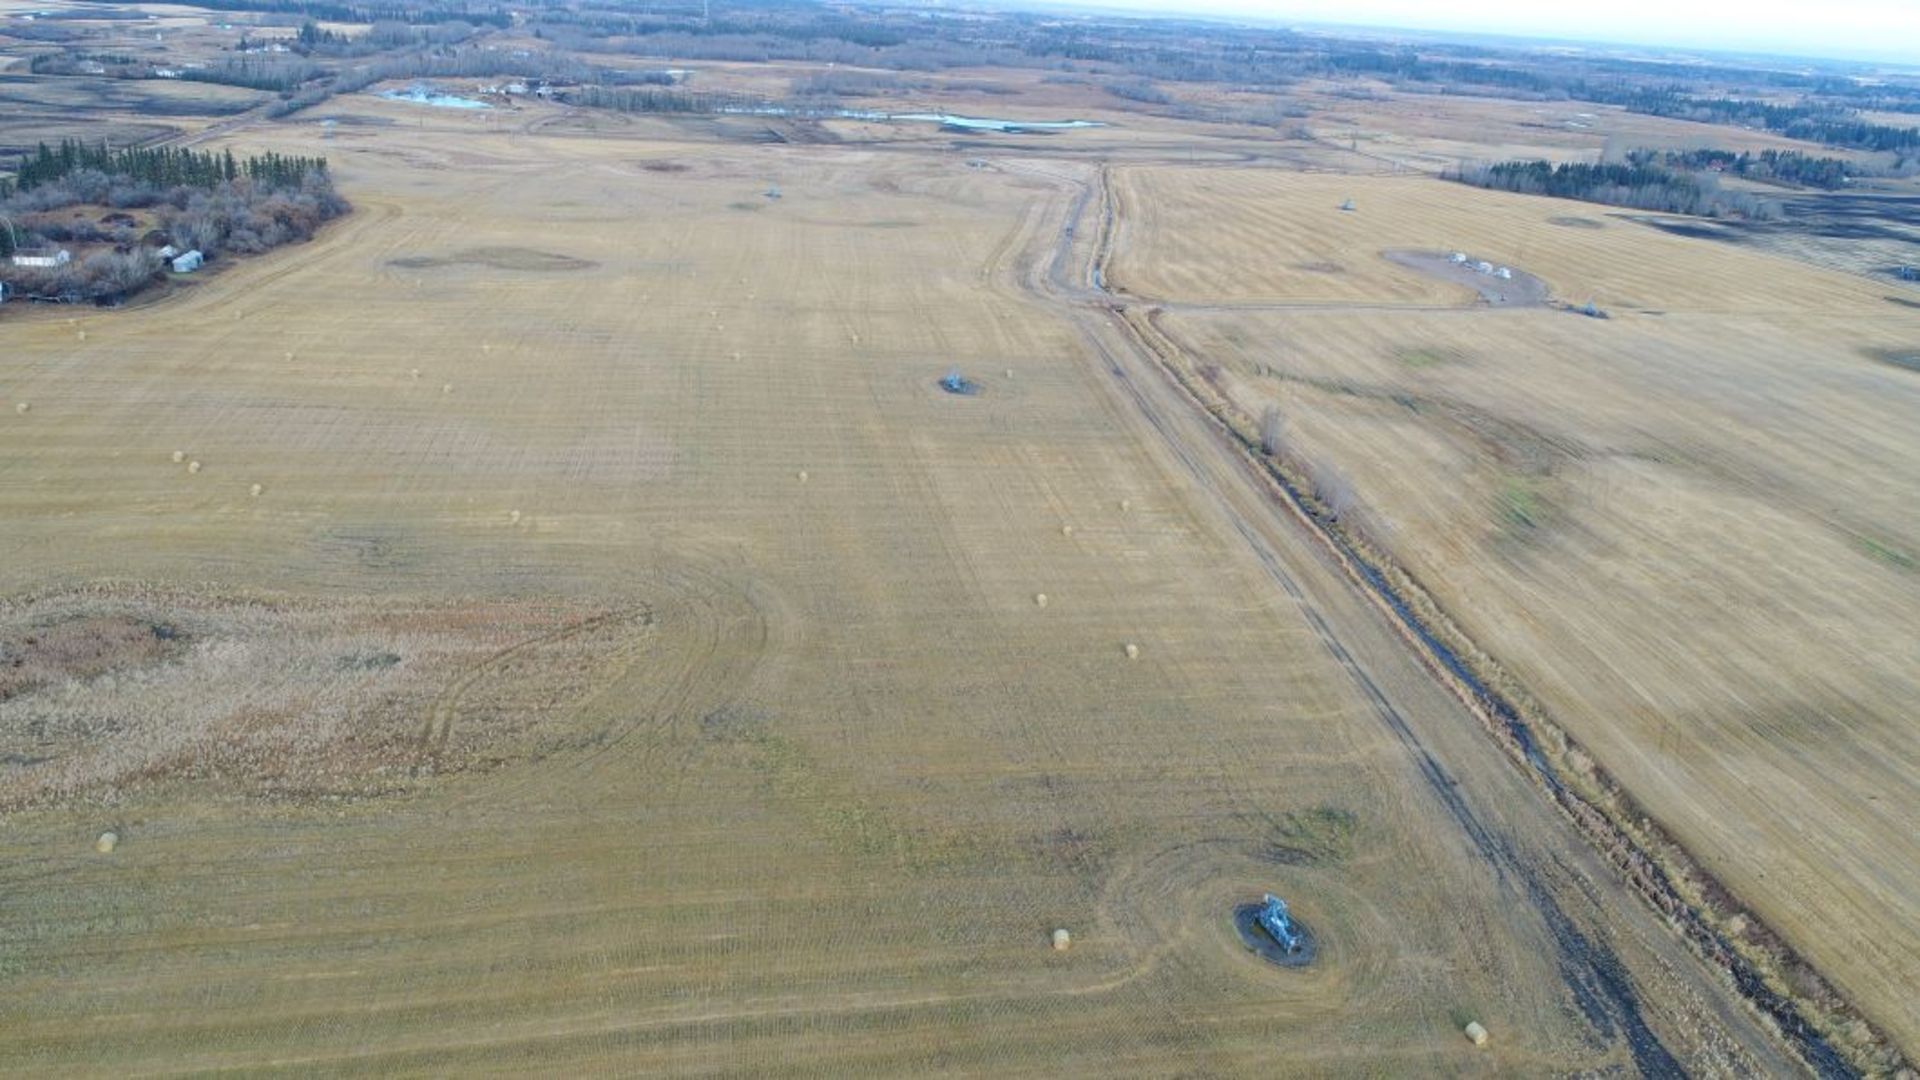 160+/- Total Acres NW 8-56-20-W4, Bruderheim, AB, consisting of Crop Land, Surface Lease & Yard Site - Image 10 of 34